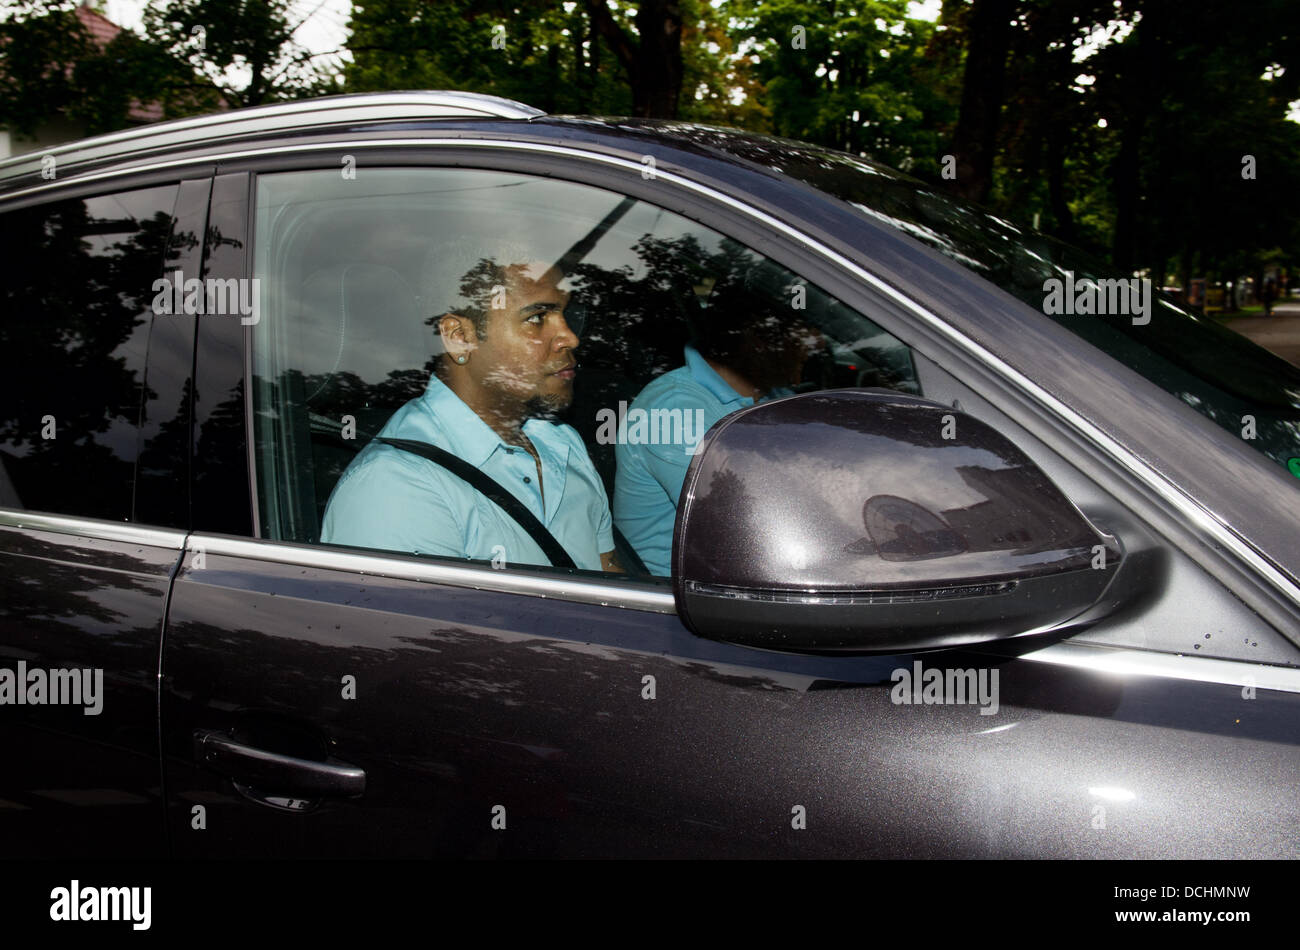 Munich, Germany. 19th Aug, 2013. FC Bayern Munich player Breno arrives on the premises of the Bundesliga soccer culb in Munich, Germany, 19 August 2013. Breno is said to work in the youth department of Bayern Munich in the course of a rehabilitation measure. Photo: PETER KNEFFEL/dpa/Alamy Live News Stock Photo